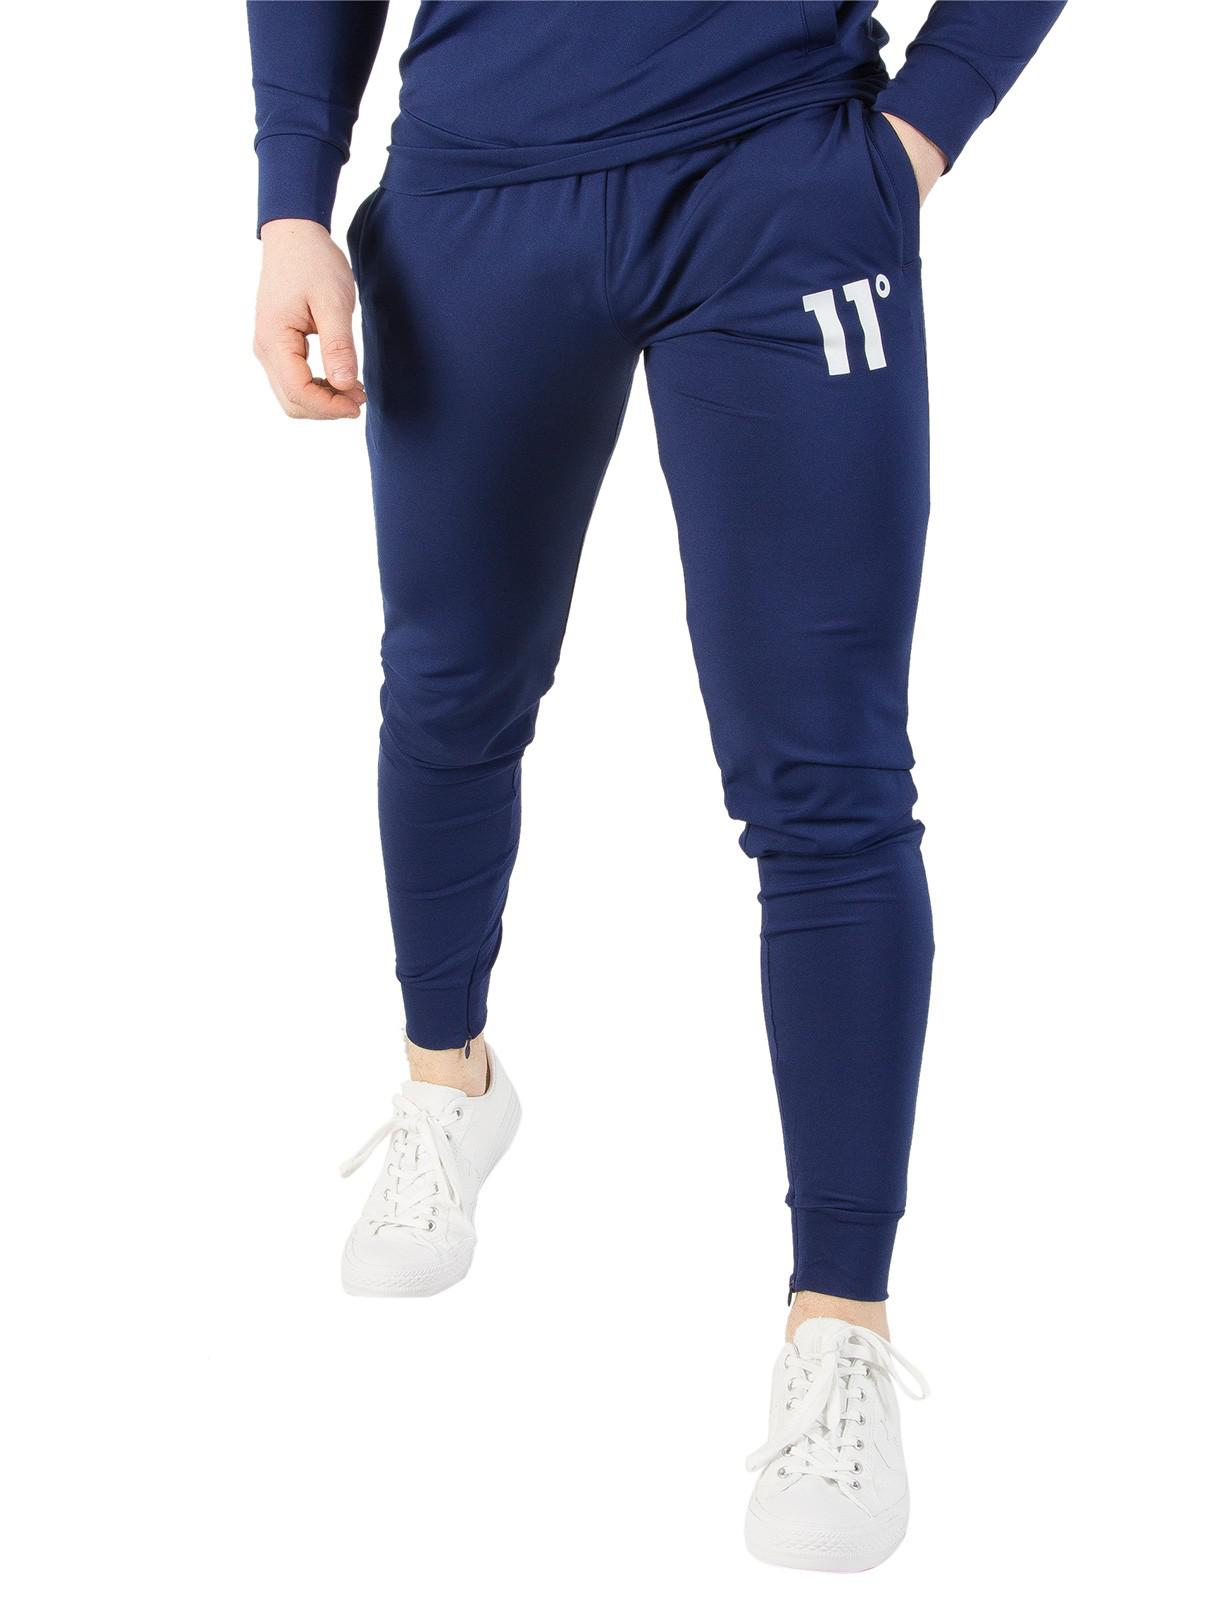 11 degrees navy tracksuit